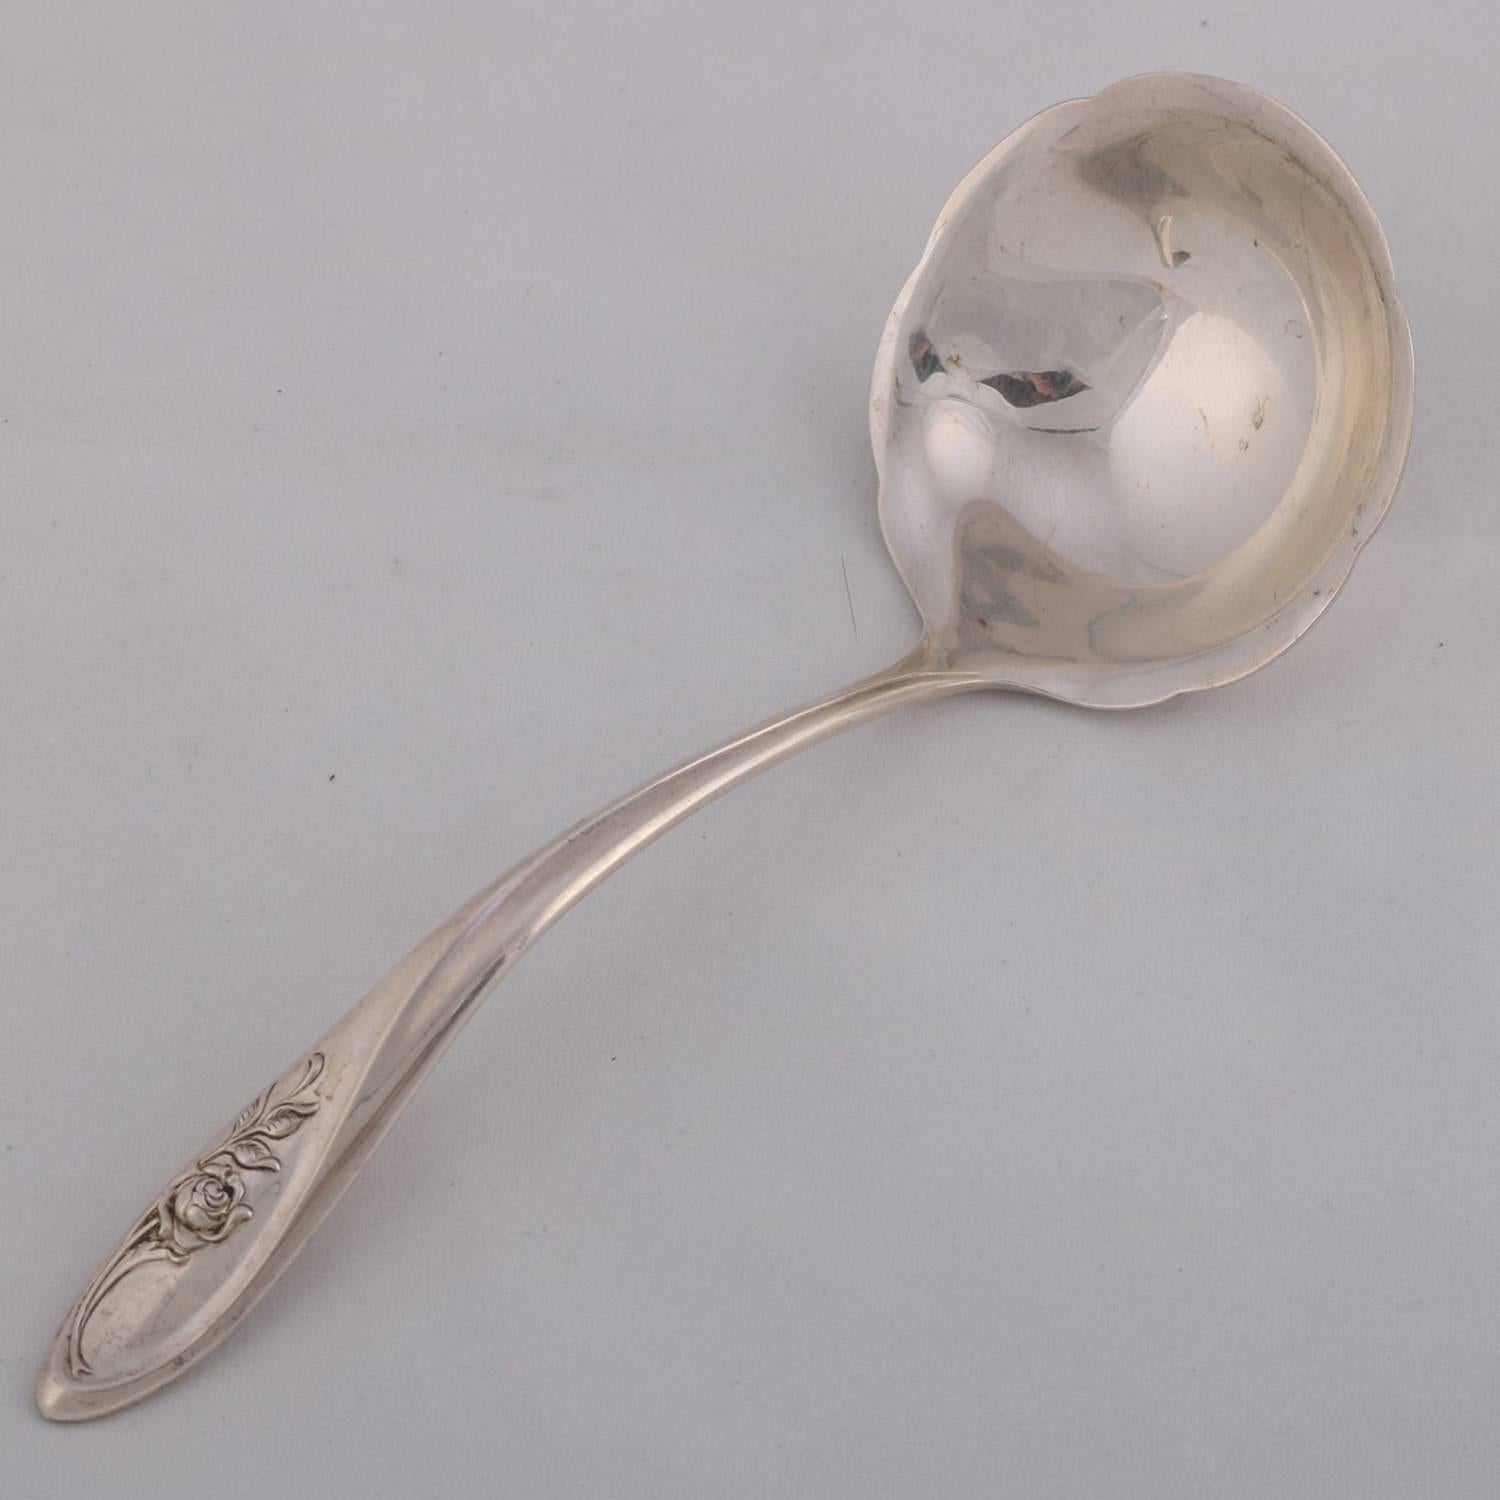 American Vintage Sterling Silver Ladle by Towle, 